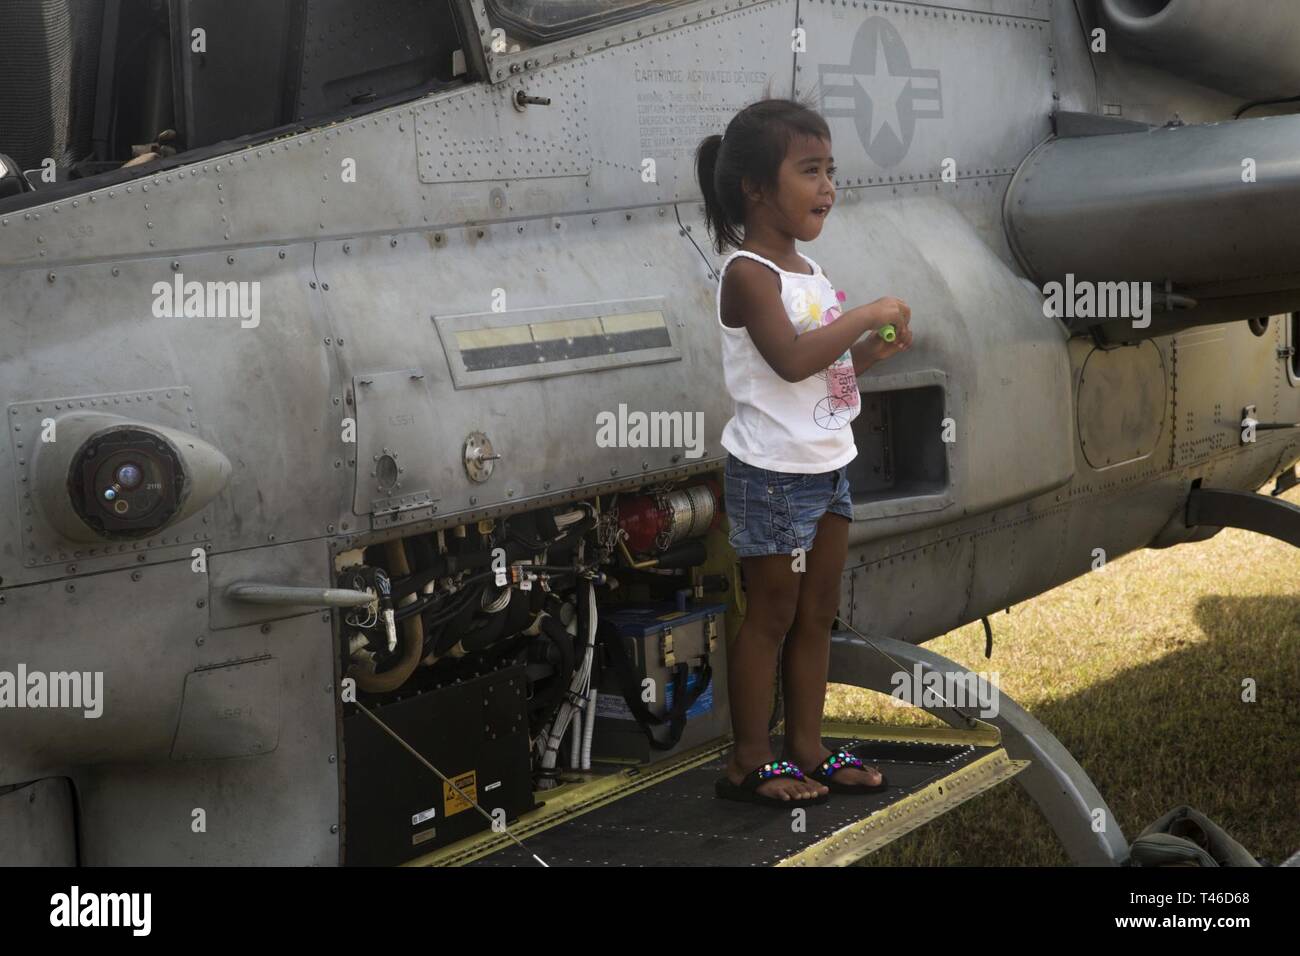 A young Tinian resident stands for a photo beside an AH-1Z Viper helicopter on Tinian, Commonwealth of the Northern Mariana Islands, March 11, 2019. Marines and Sailors with Combat Logistics Battalion 31 led a multi-service task force, partnering with the Federal Emergency Management Agency, to help the U.S. citizens of Tinian begin recovery efforts in the wake of Super Typhoon Yutu last year. The Marines and Sailors, currently participating in two weeks of unit-level training on nearby Guam, visited Tinian to meet with members of the community affected by Yutu in late October 2018. CLB-31 pro Stock Photo